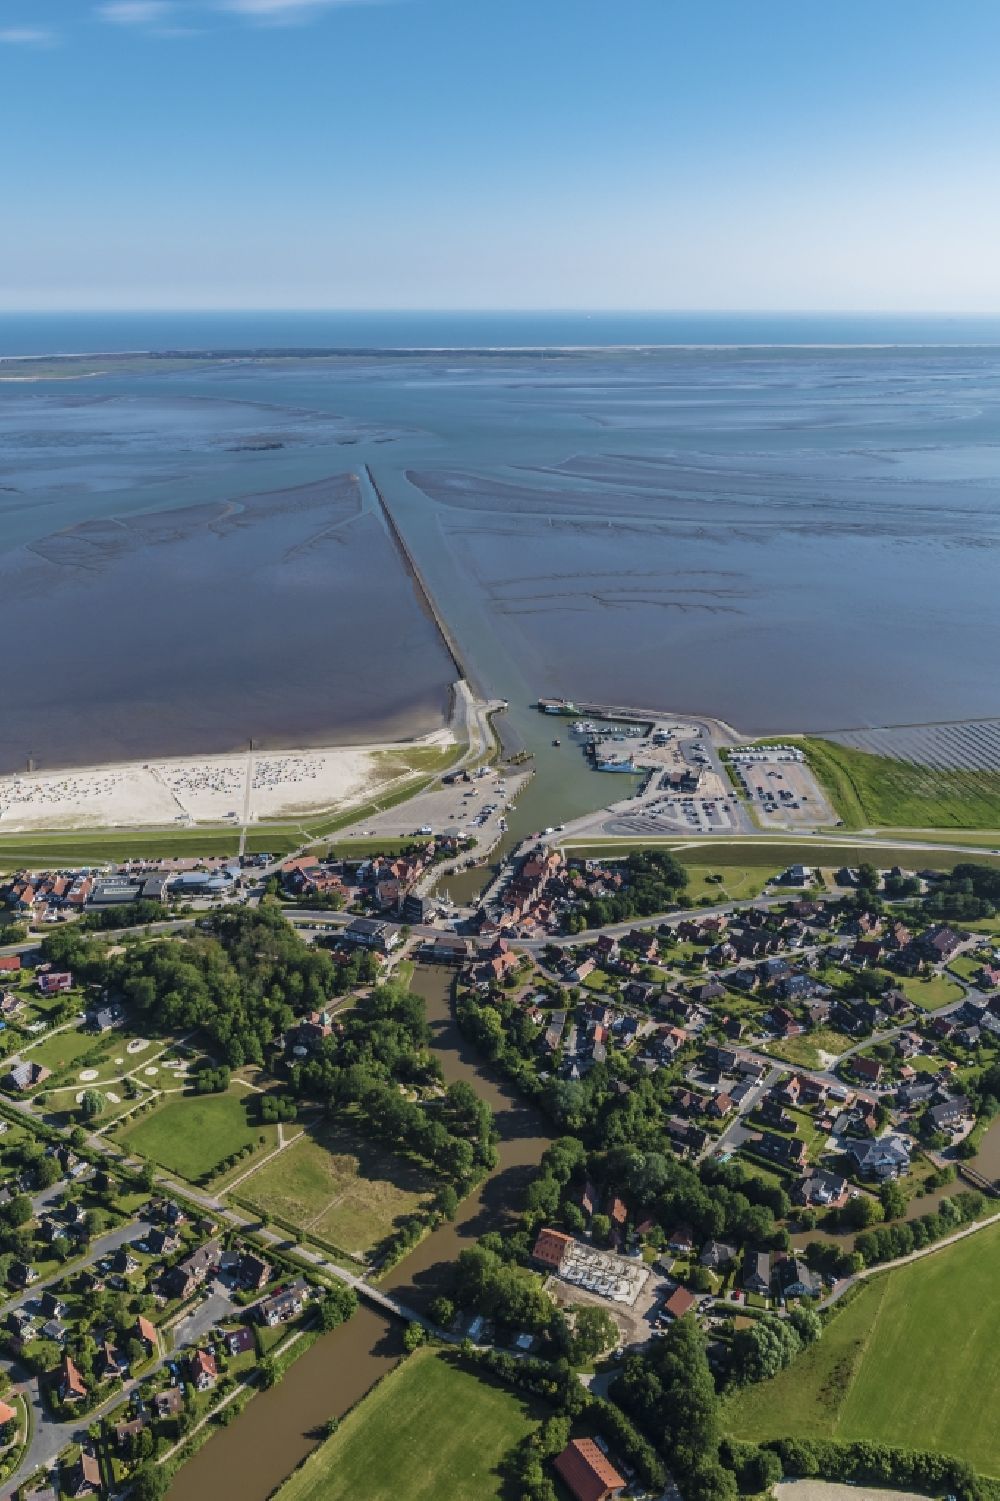 Aerial image Neuharlingersiel - East Frisian Coast in Neuharlingersiel in the state of Lower Saxony. The borough of Neuharlingersiel is located in Harlinger Land in East Frisia on the North Sea shore. The coastal line consists of the Lower Saxony Wadden Sea which has been named a UNESCO world heritage site in 2009. The landscape is characterised by Wadden Sea, agriculture and fields